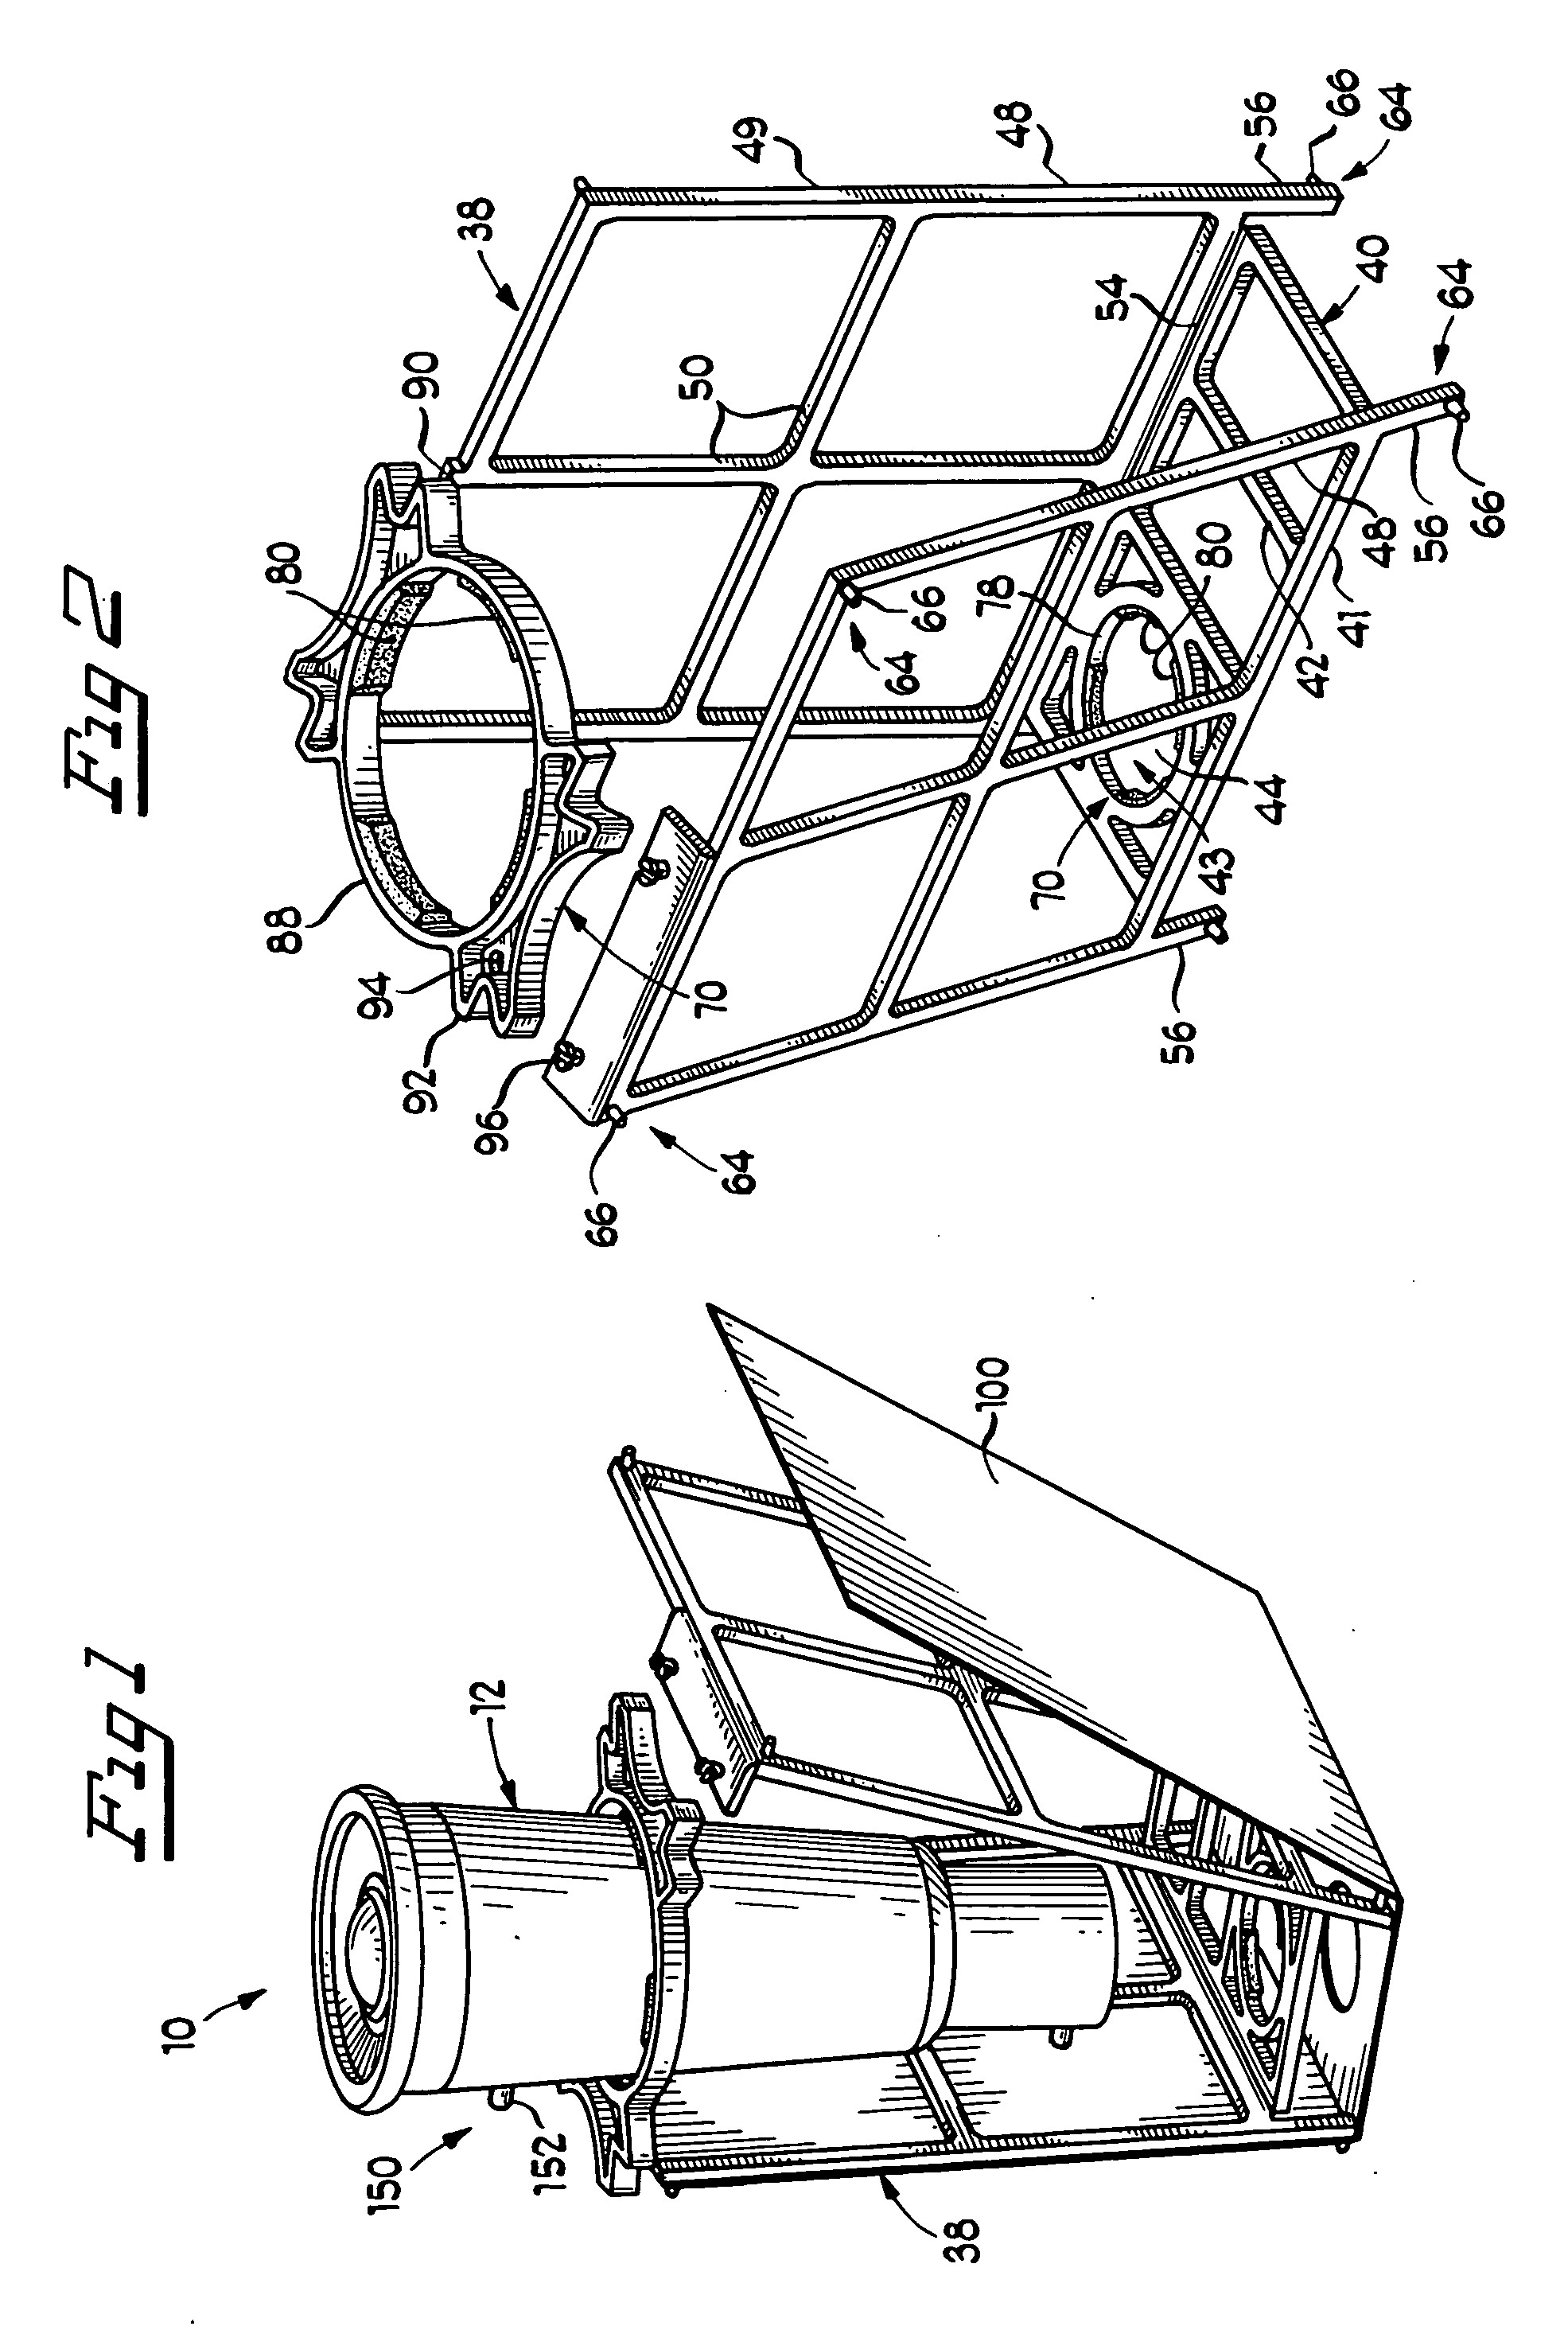 Foldable, refillable, sustained-release fluid delivery system